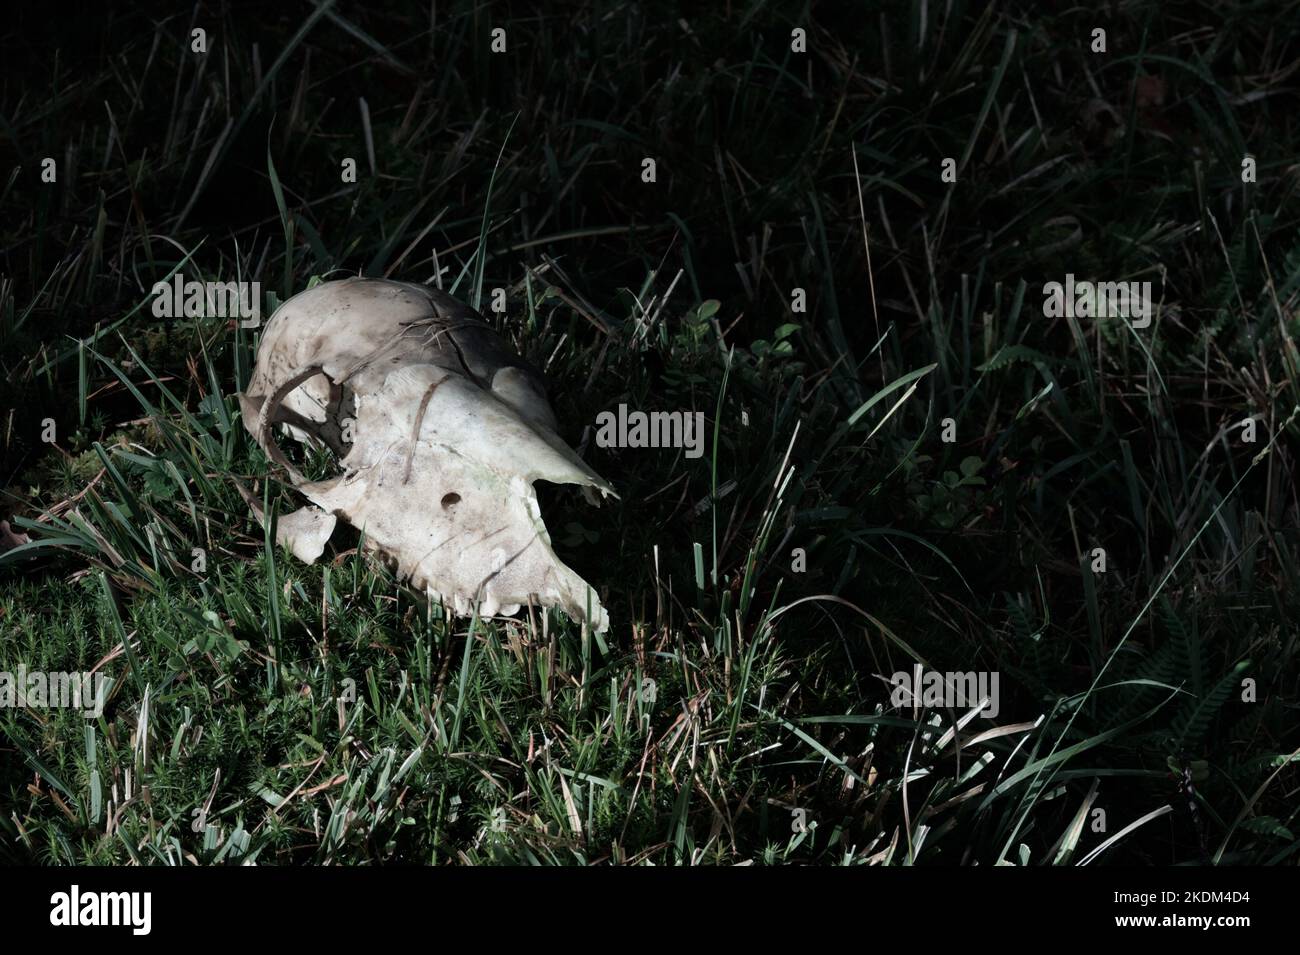 Deer Skull Laying On A Bed Of Grass In A Shaft Of Light , New Forest UK With Copyspace Stock Photo